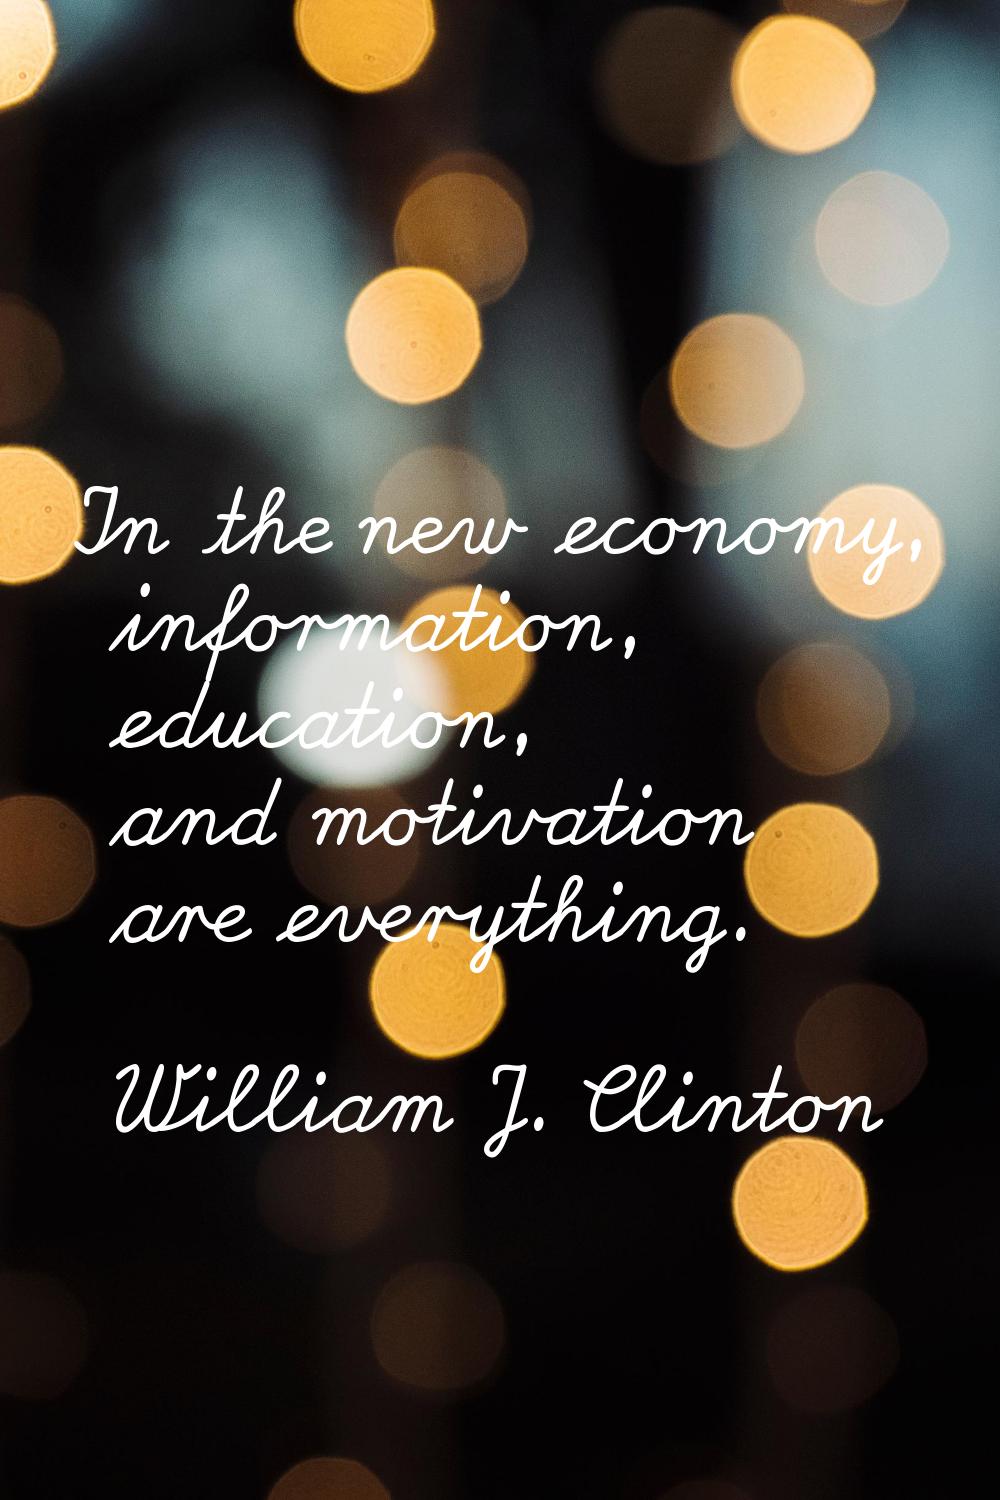 In the new economy, information, education, and motivation are everything.